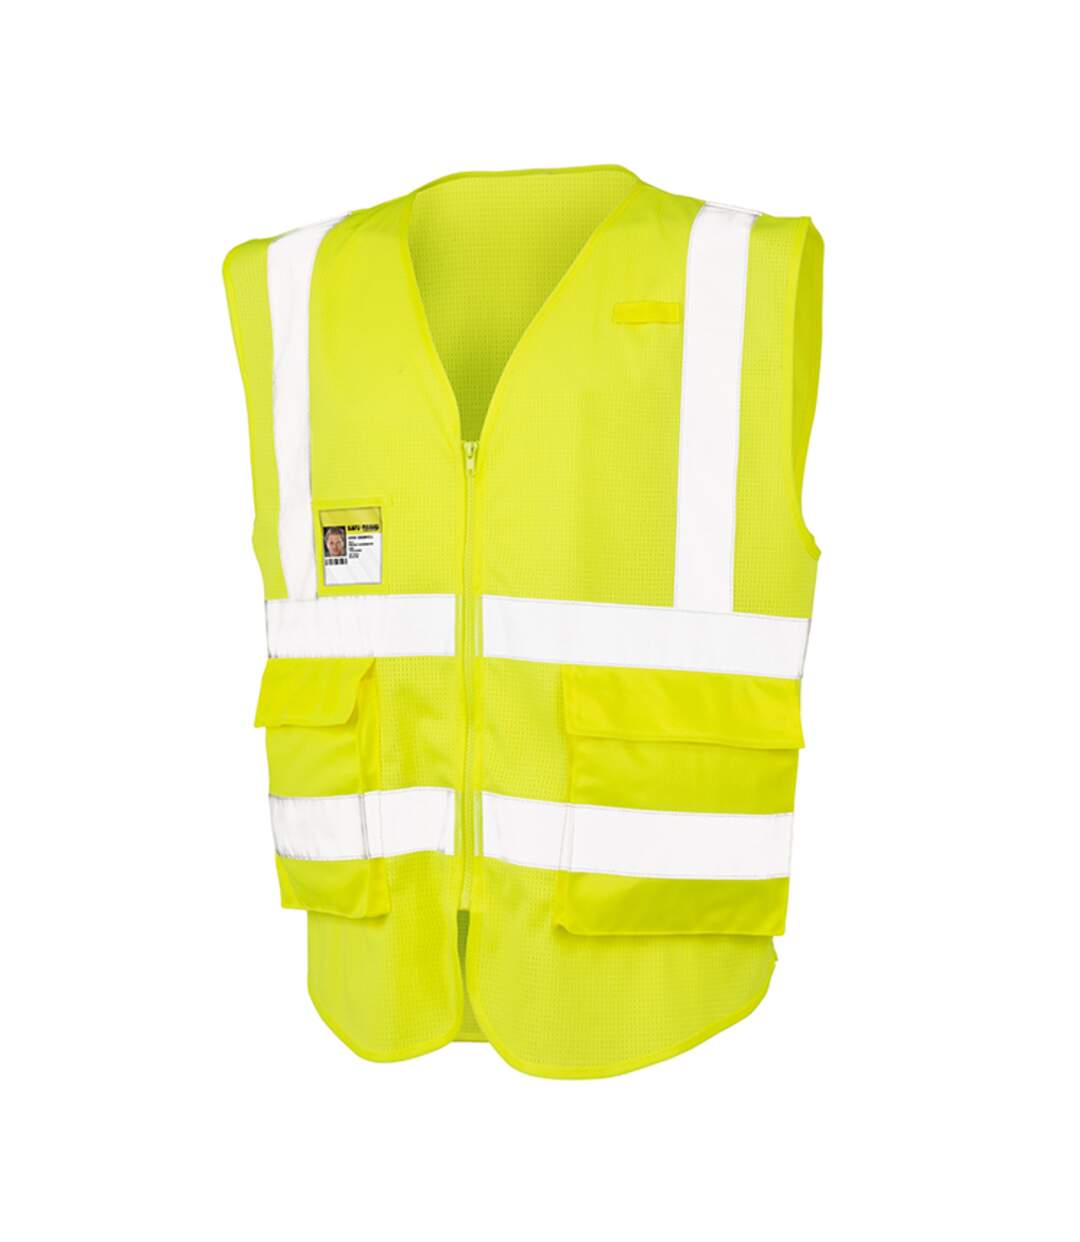 SAFE-GUARD by Result Mens Executive Cool Mesh Safety Vest (Fluorescent Yellow) - UTBC4905